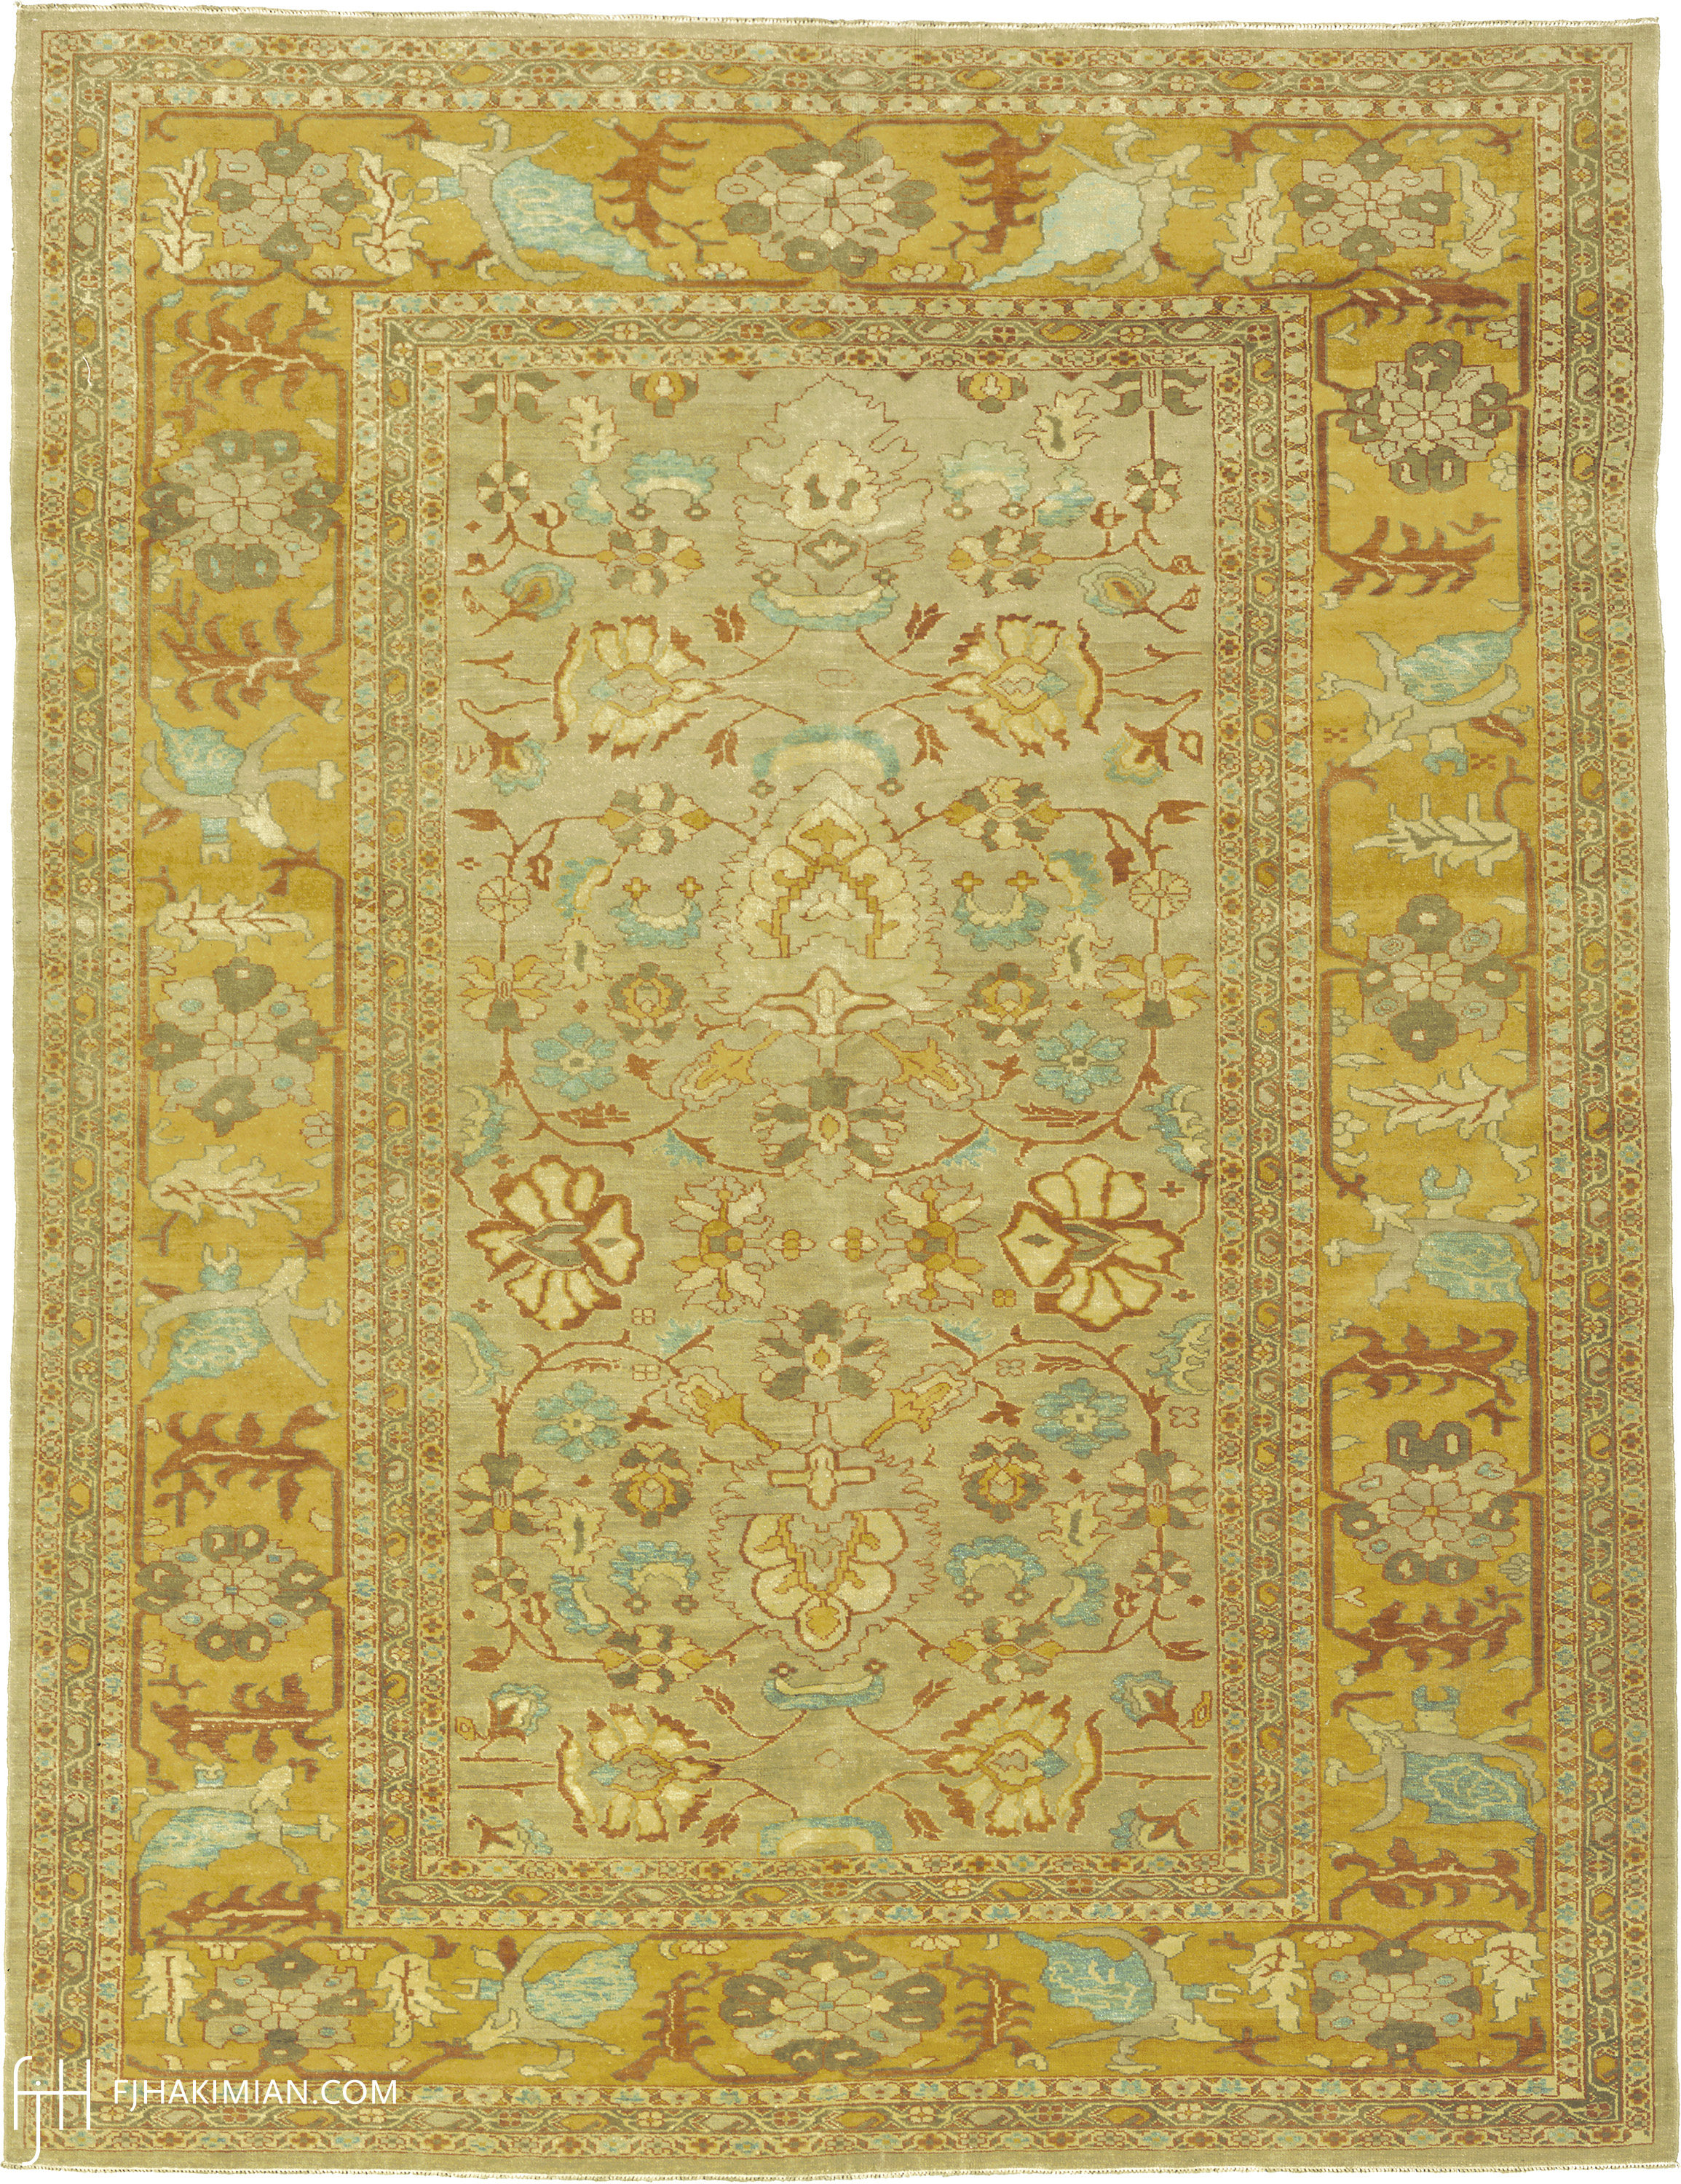 Orchid Design | Custom Traditional Carpet | FJ Hakimian | Carpet Gallery in NY